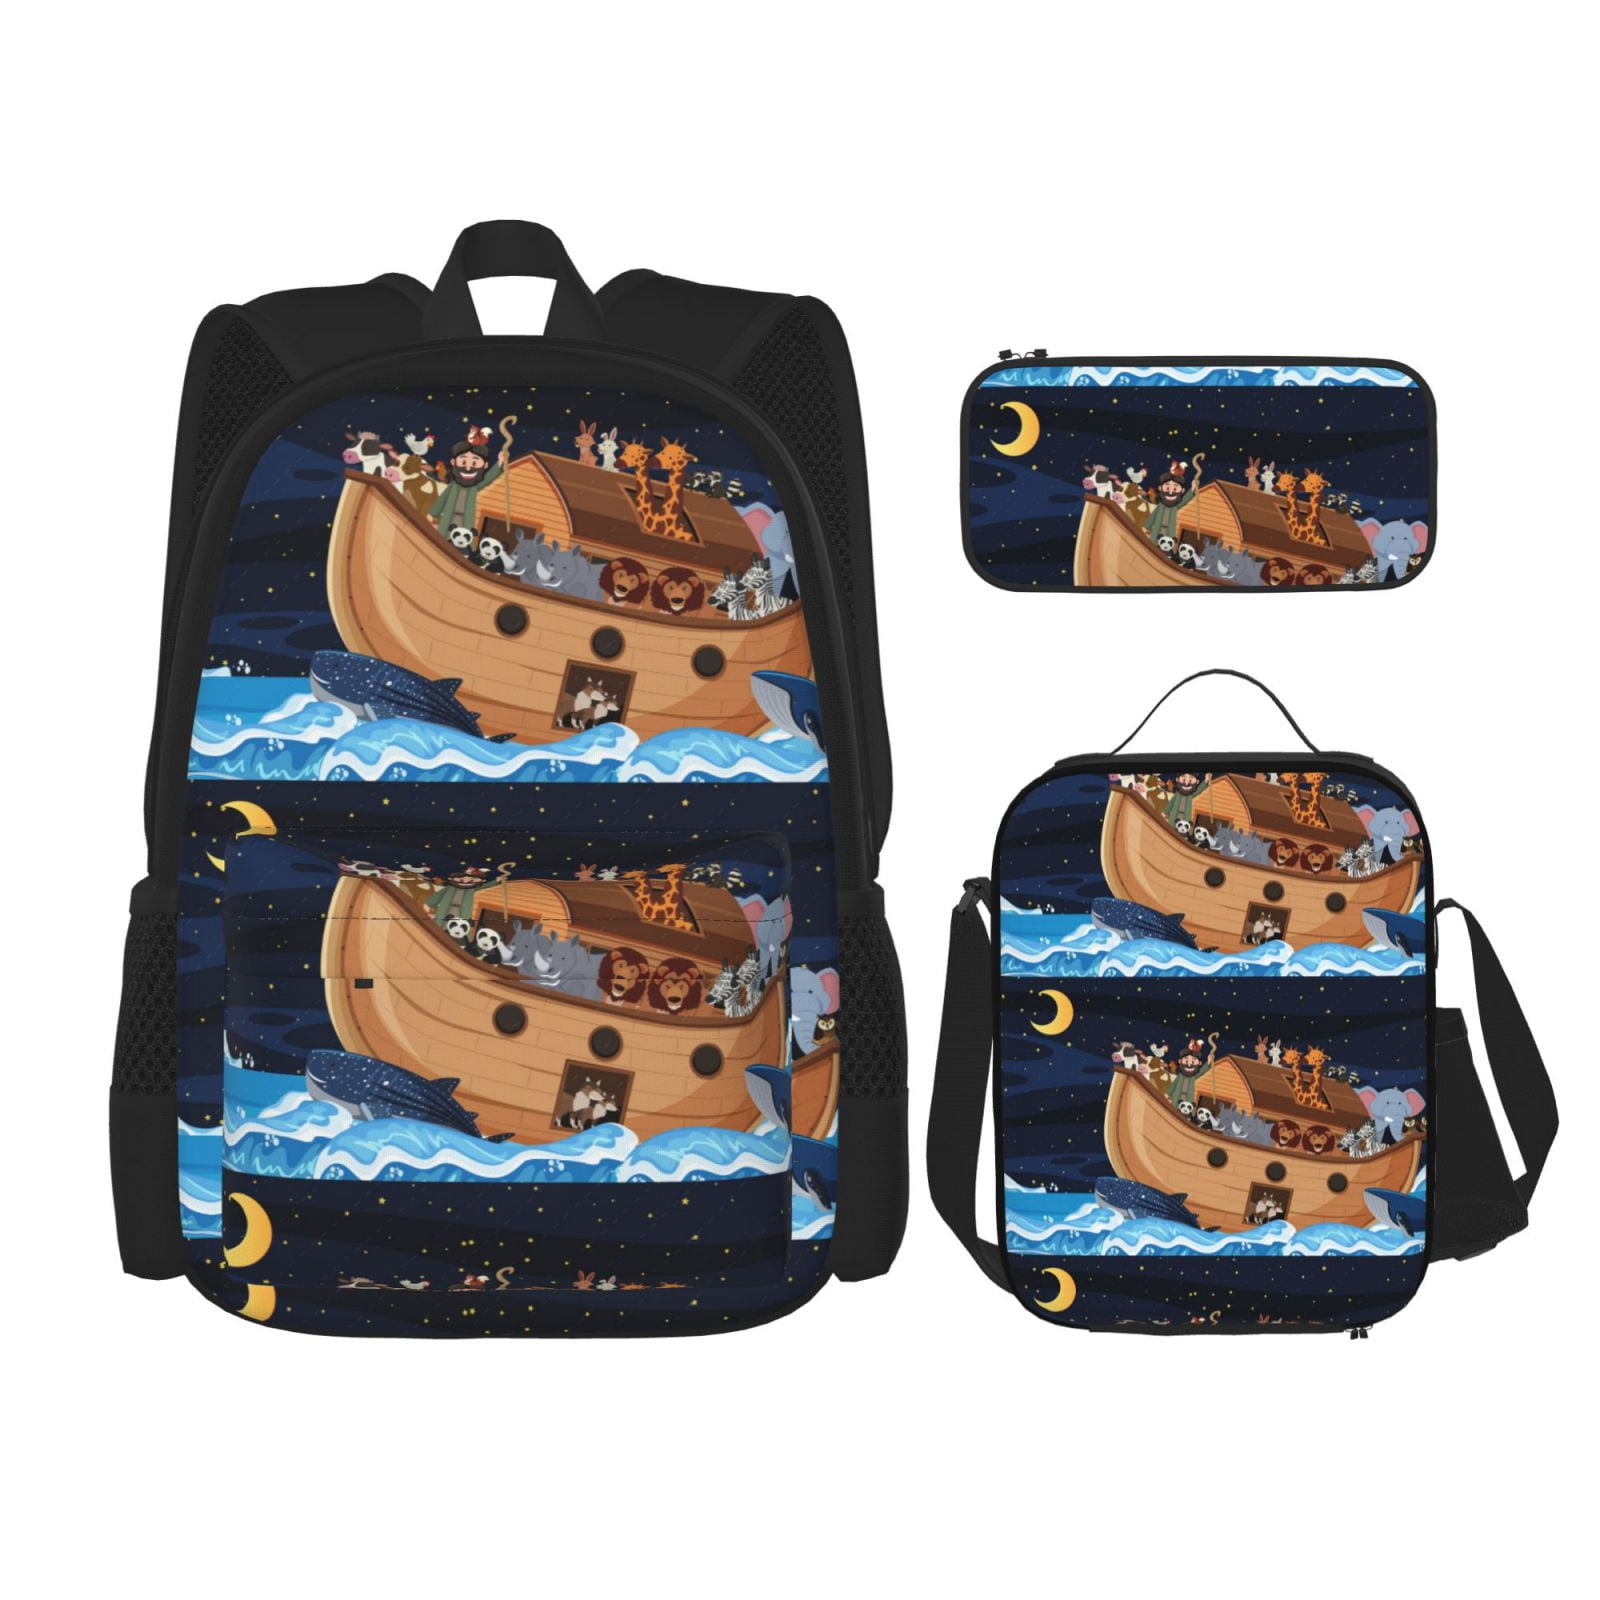 Easygdp Ocean Scene with Noah's Ark Backpack for Boys and Girls with ...